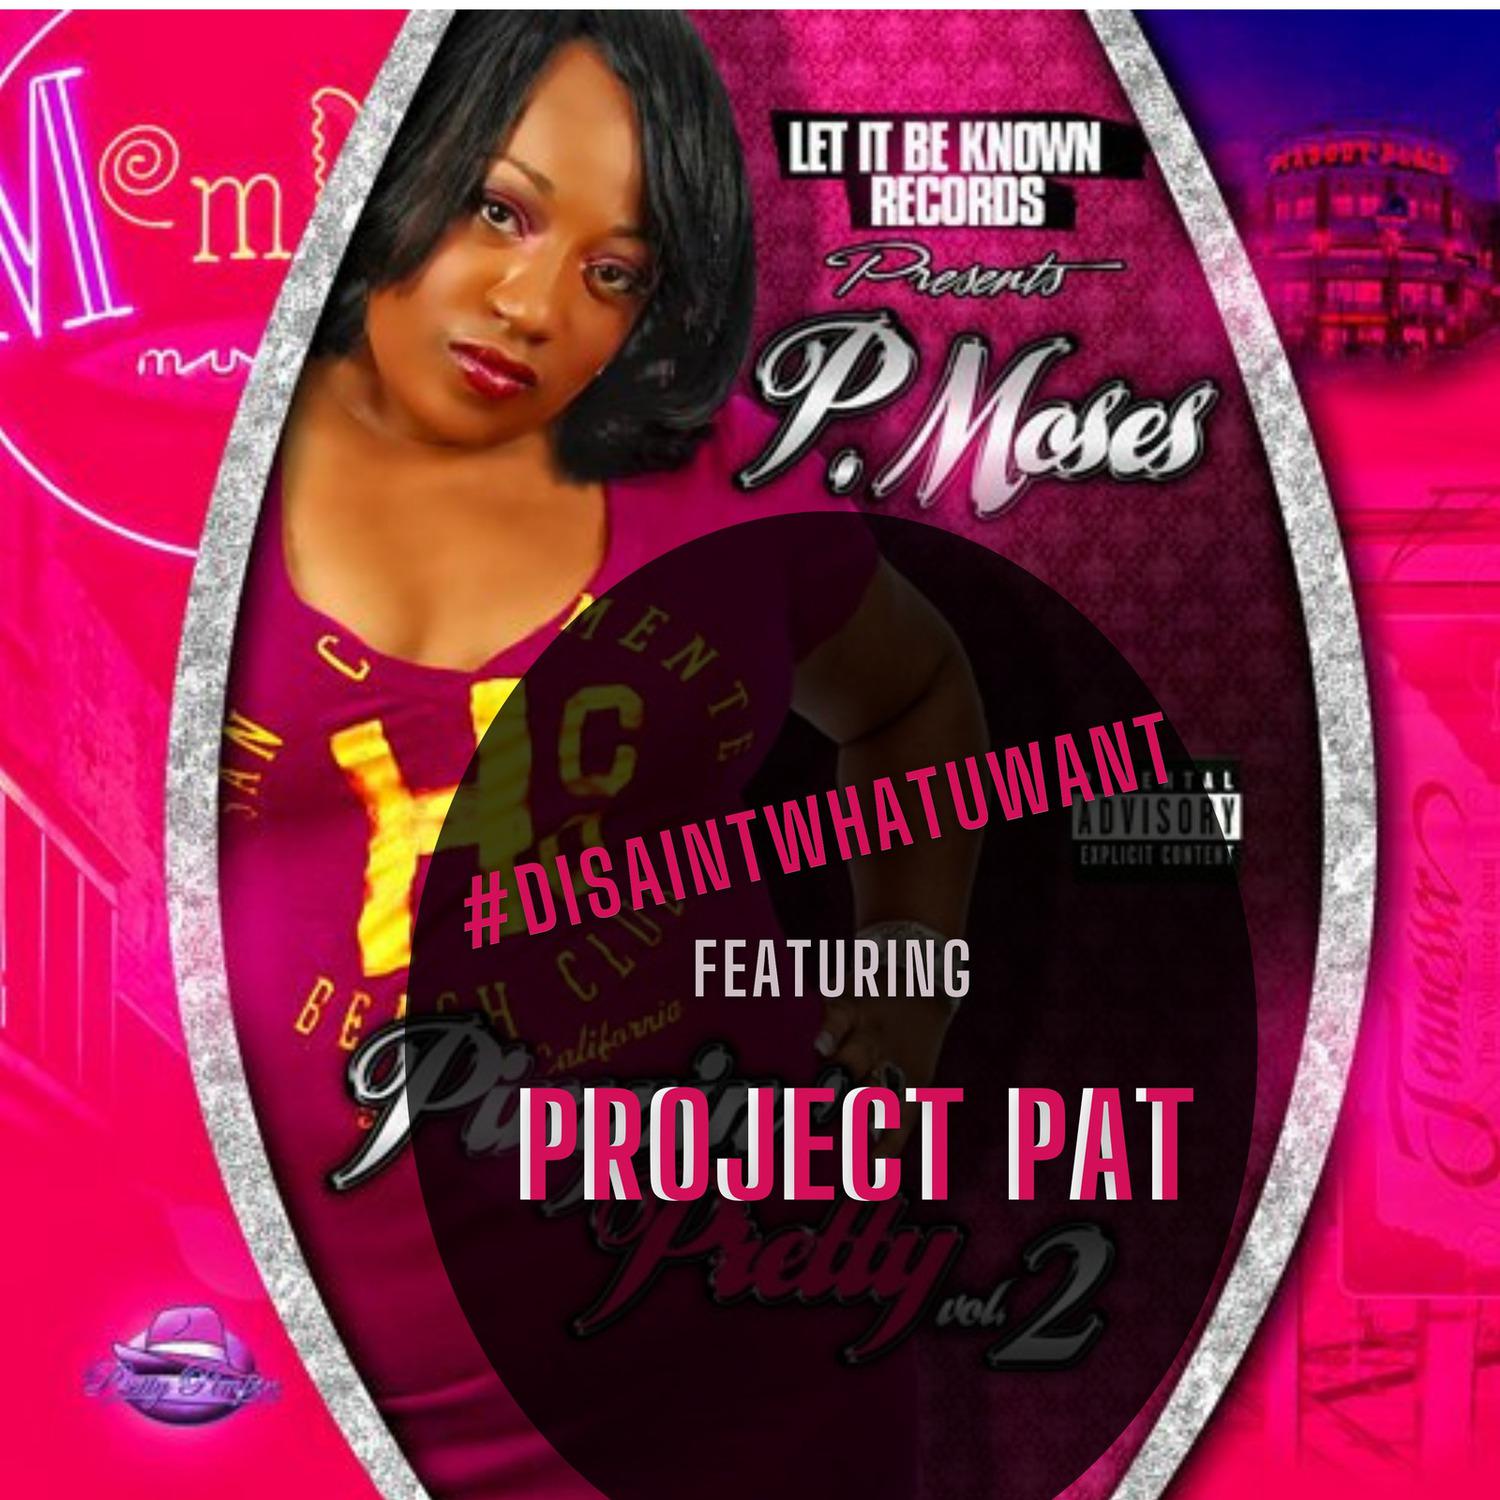 project pat ooh nuthin download